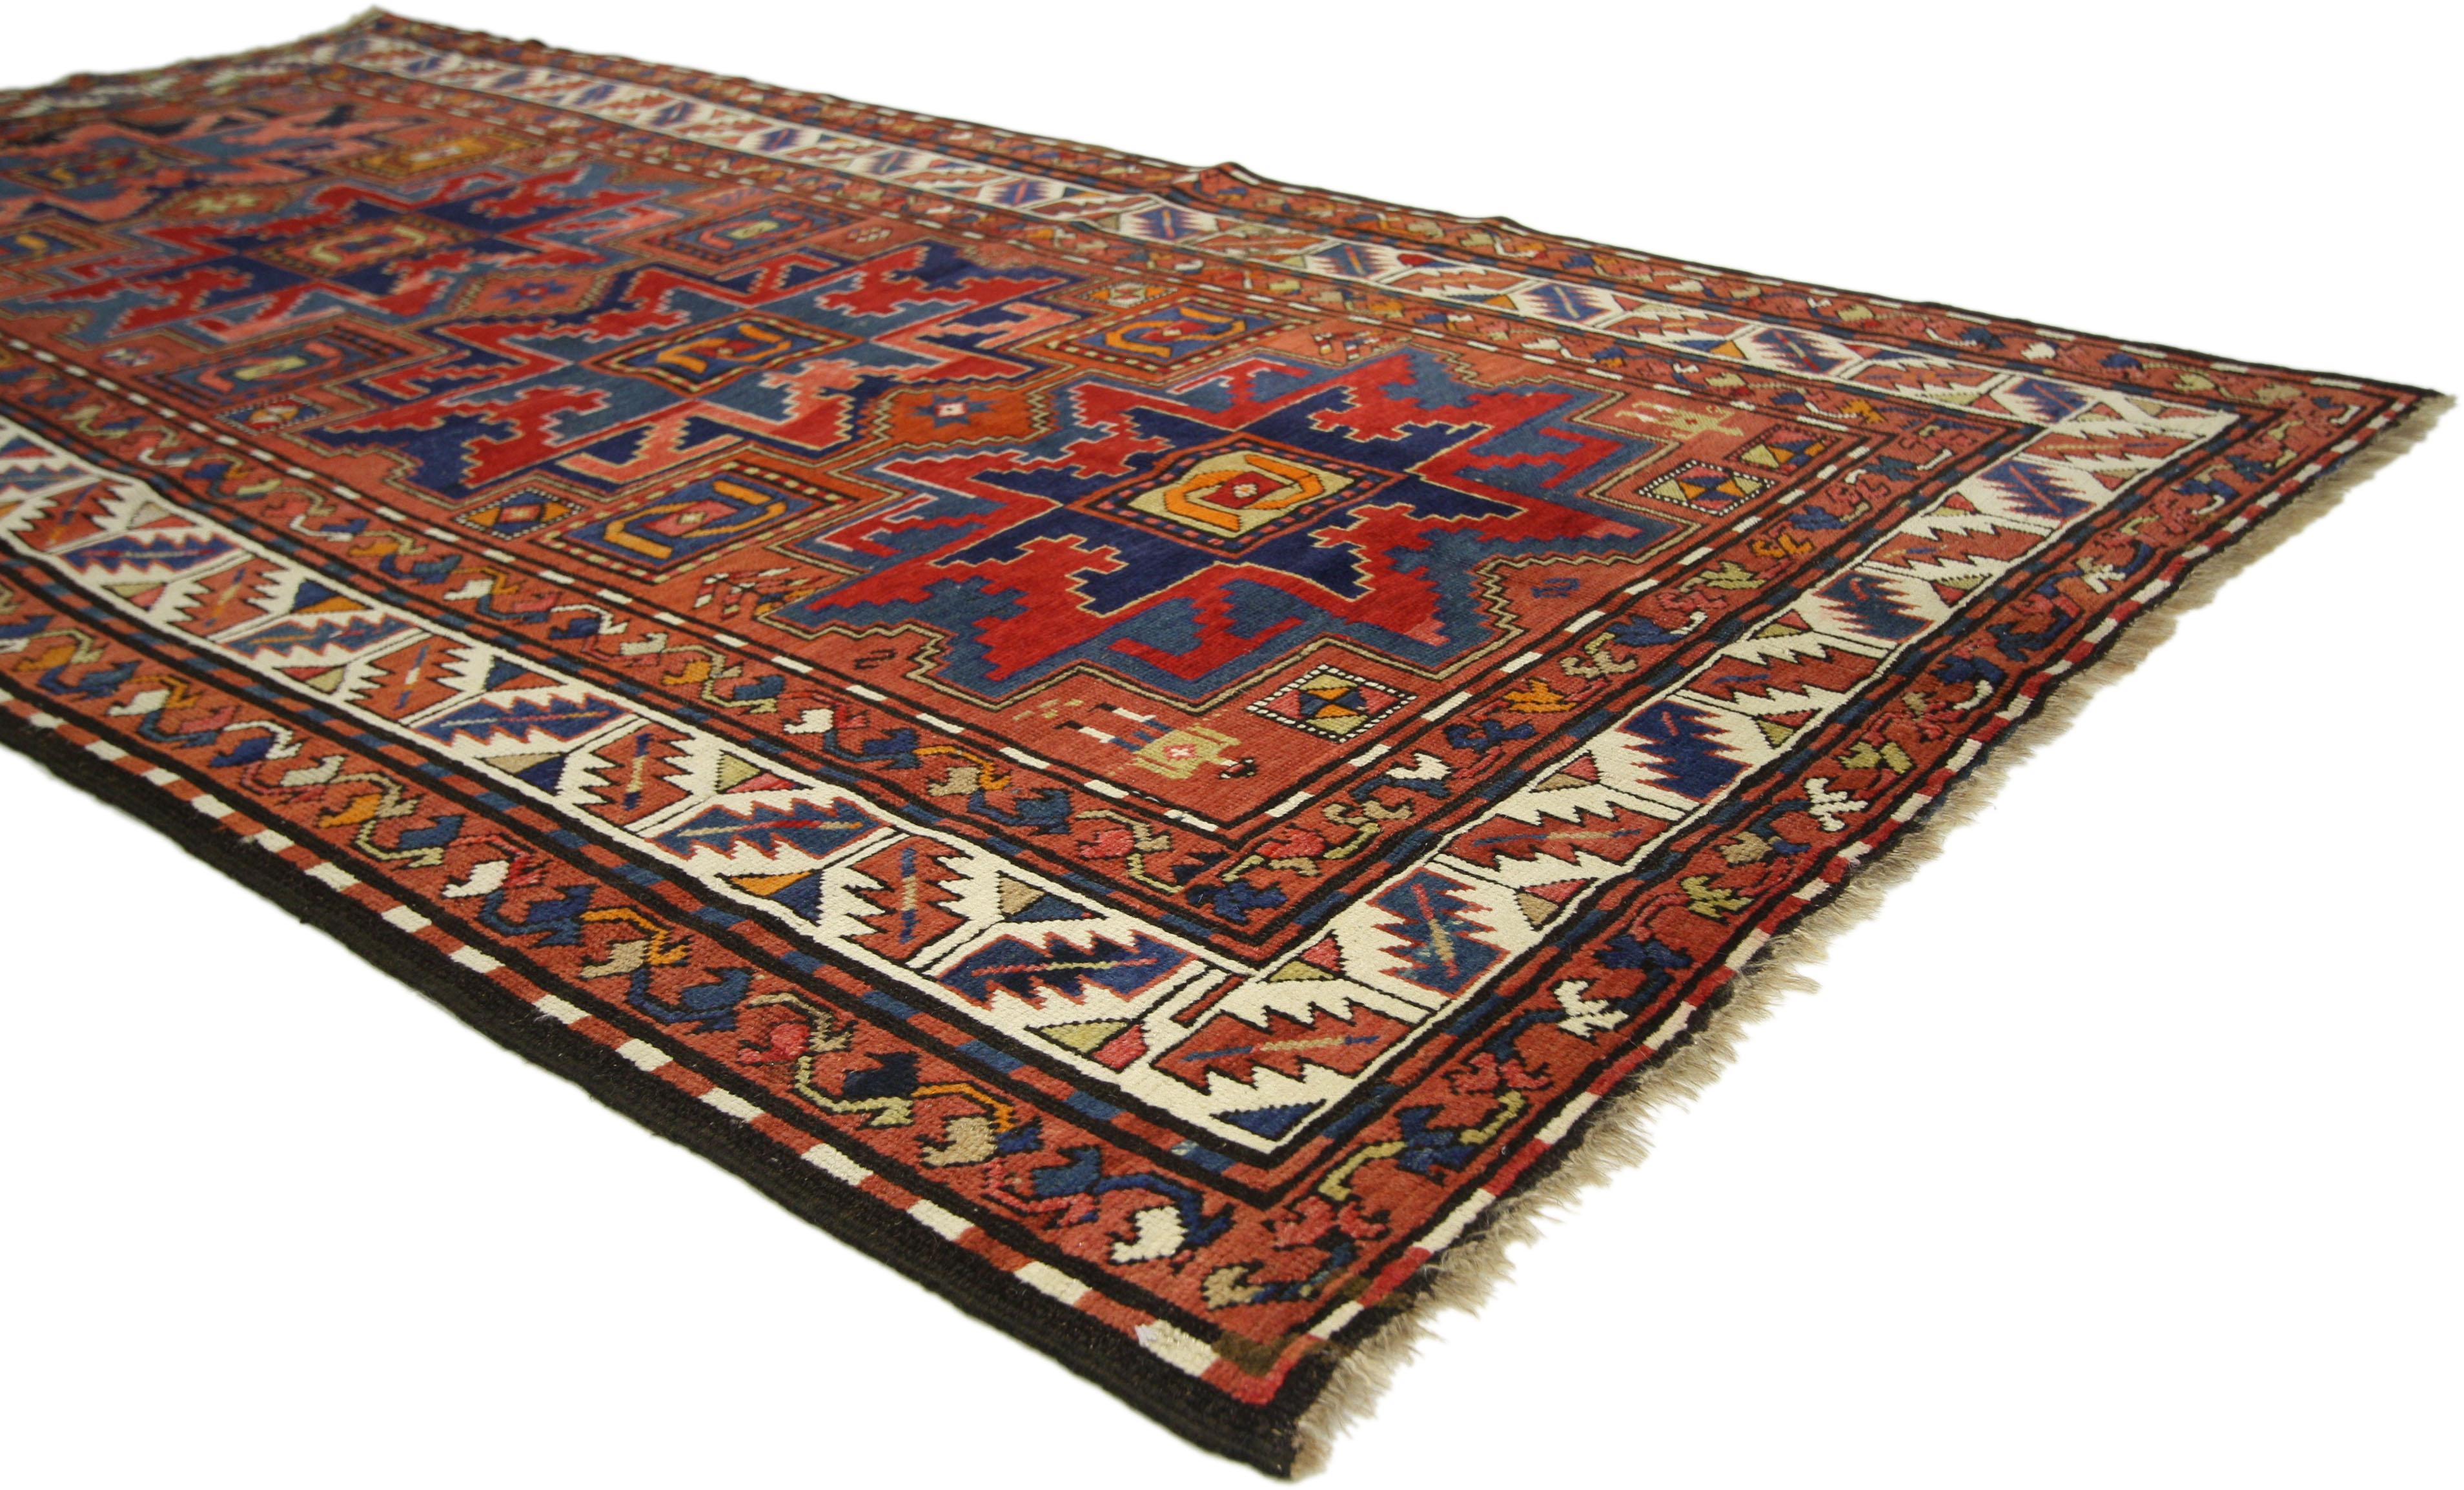 73306 Antique Caucasian Kazak Rug, 04'04 X 08'07.
Based on traditional designs from the Caucasus region, this hand-knotted wool antique Russian Kazak rug features four Lesghi Stars surrounded by classic Caucasian motifs representing protection,